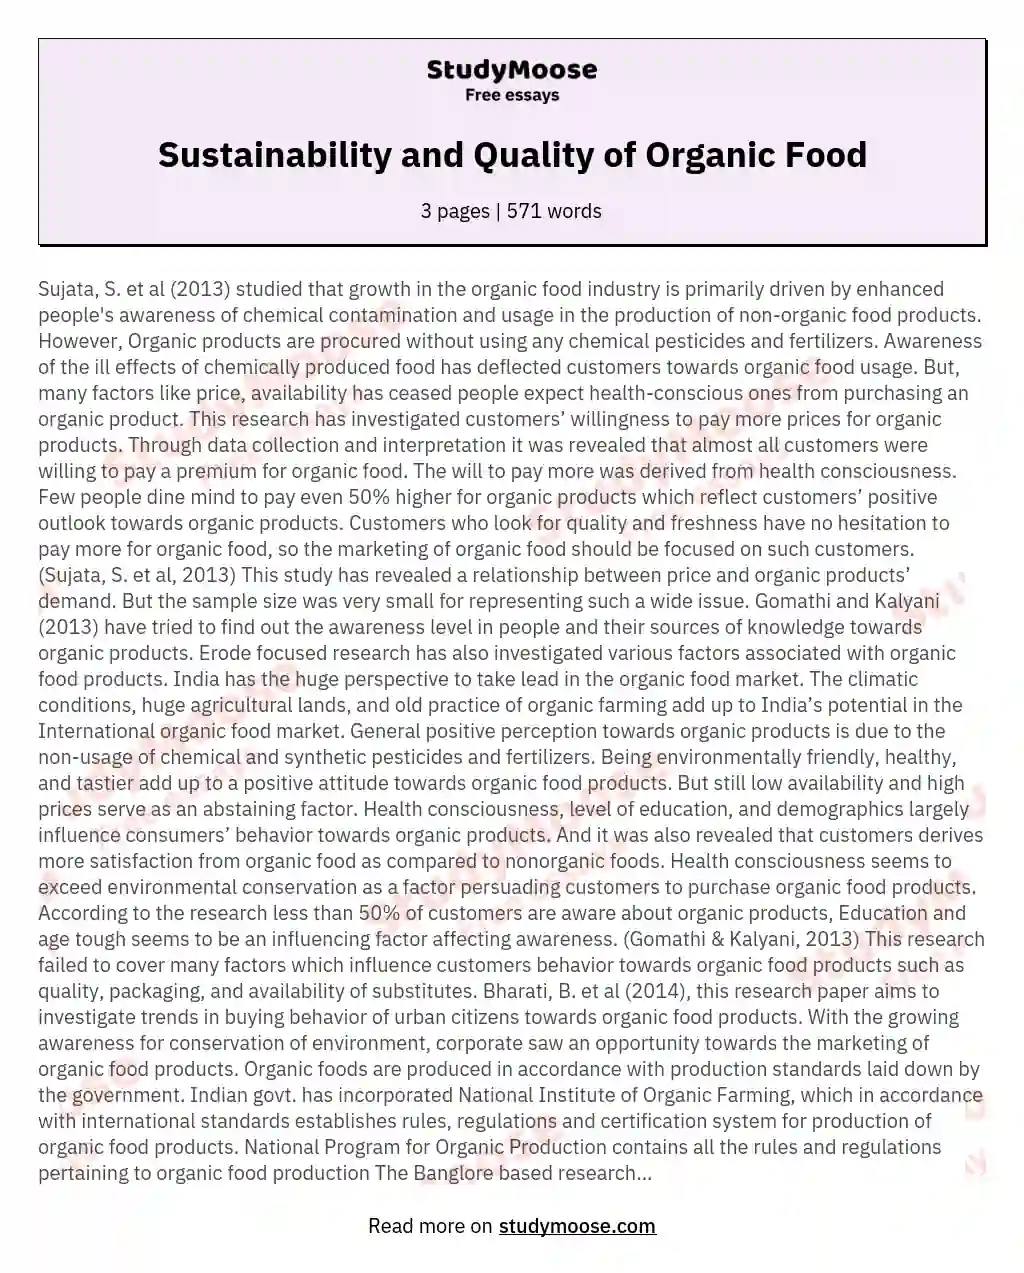 Sustainability and Quality of Organic Food